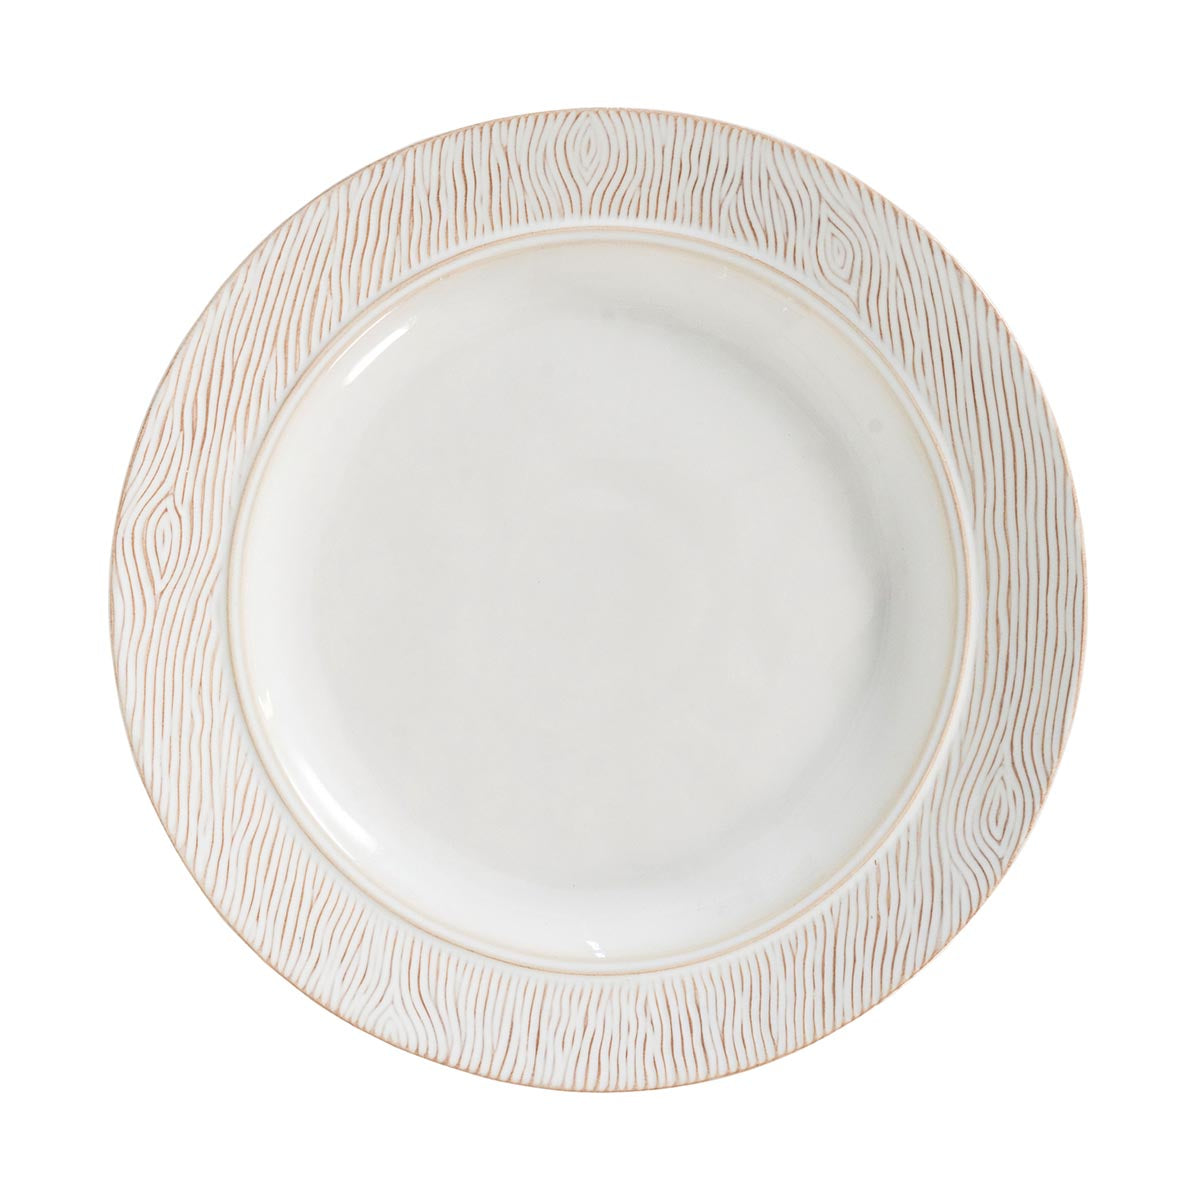 Inspired by the oldest grove of oak trees in England’s Blenheim Park, this woodgrain textured collection is rendered in a fresh and peaceful palette of creams and warm browns, with our signature whitewash glaze and a patina to highlight the beautifully rich motif. Equally idyllic and chic, this versatile dinner plate flourishes year-round, and layers easily with many other Juliska patterns.